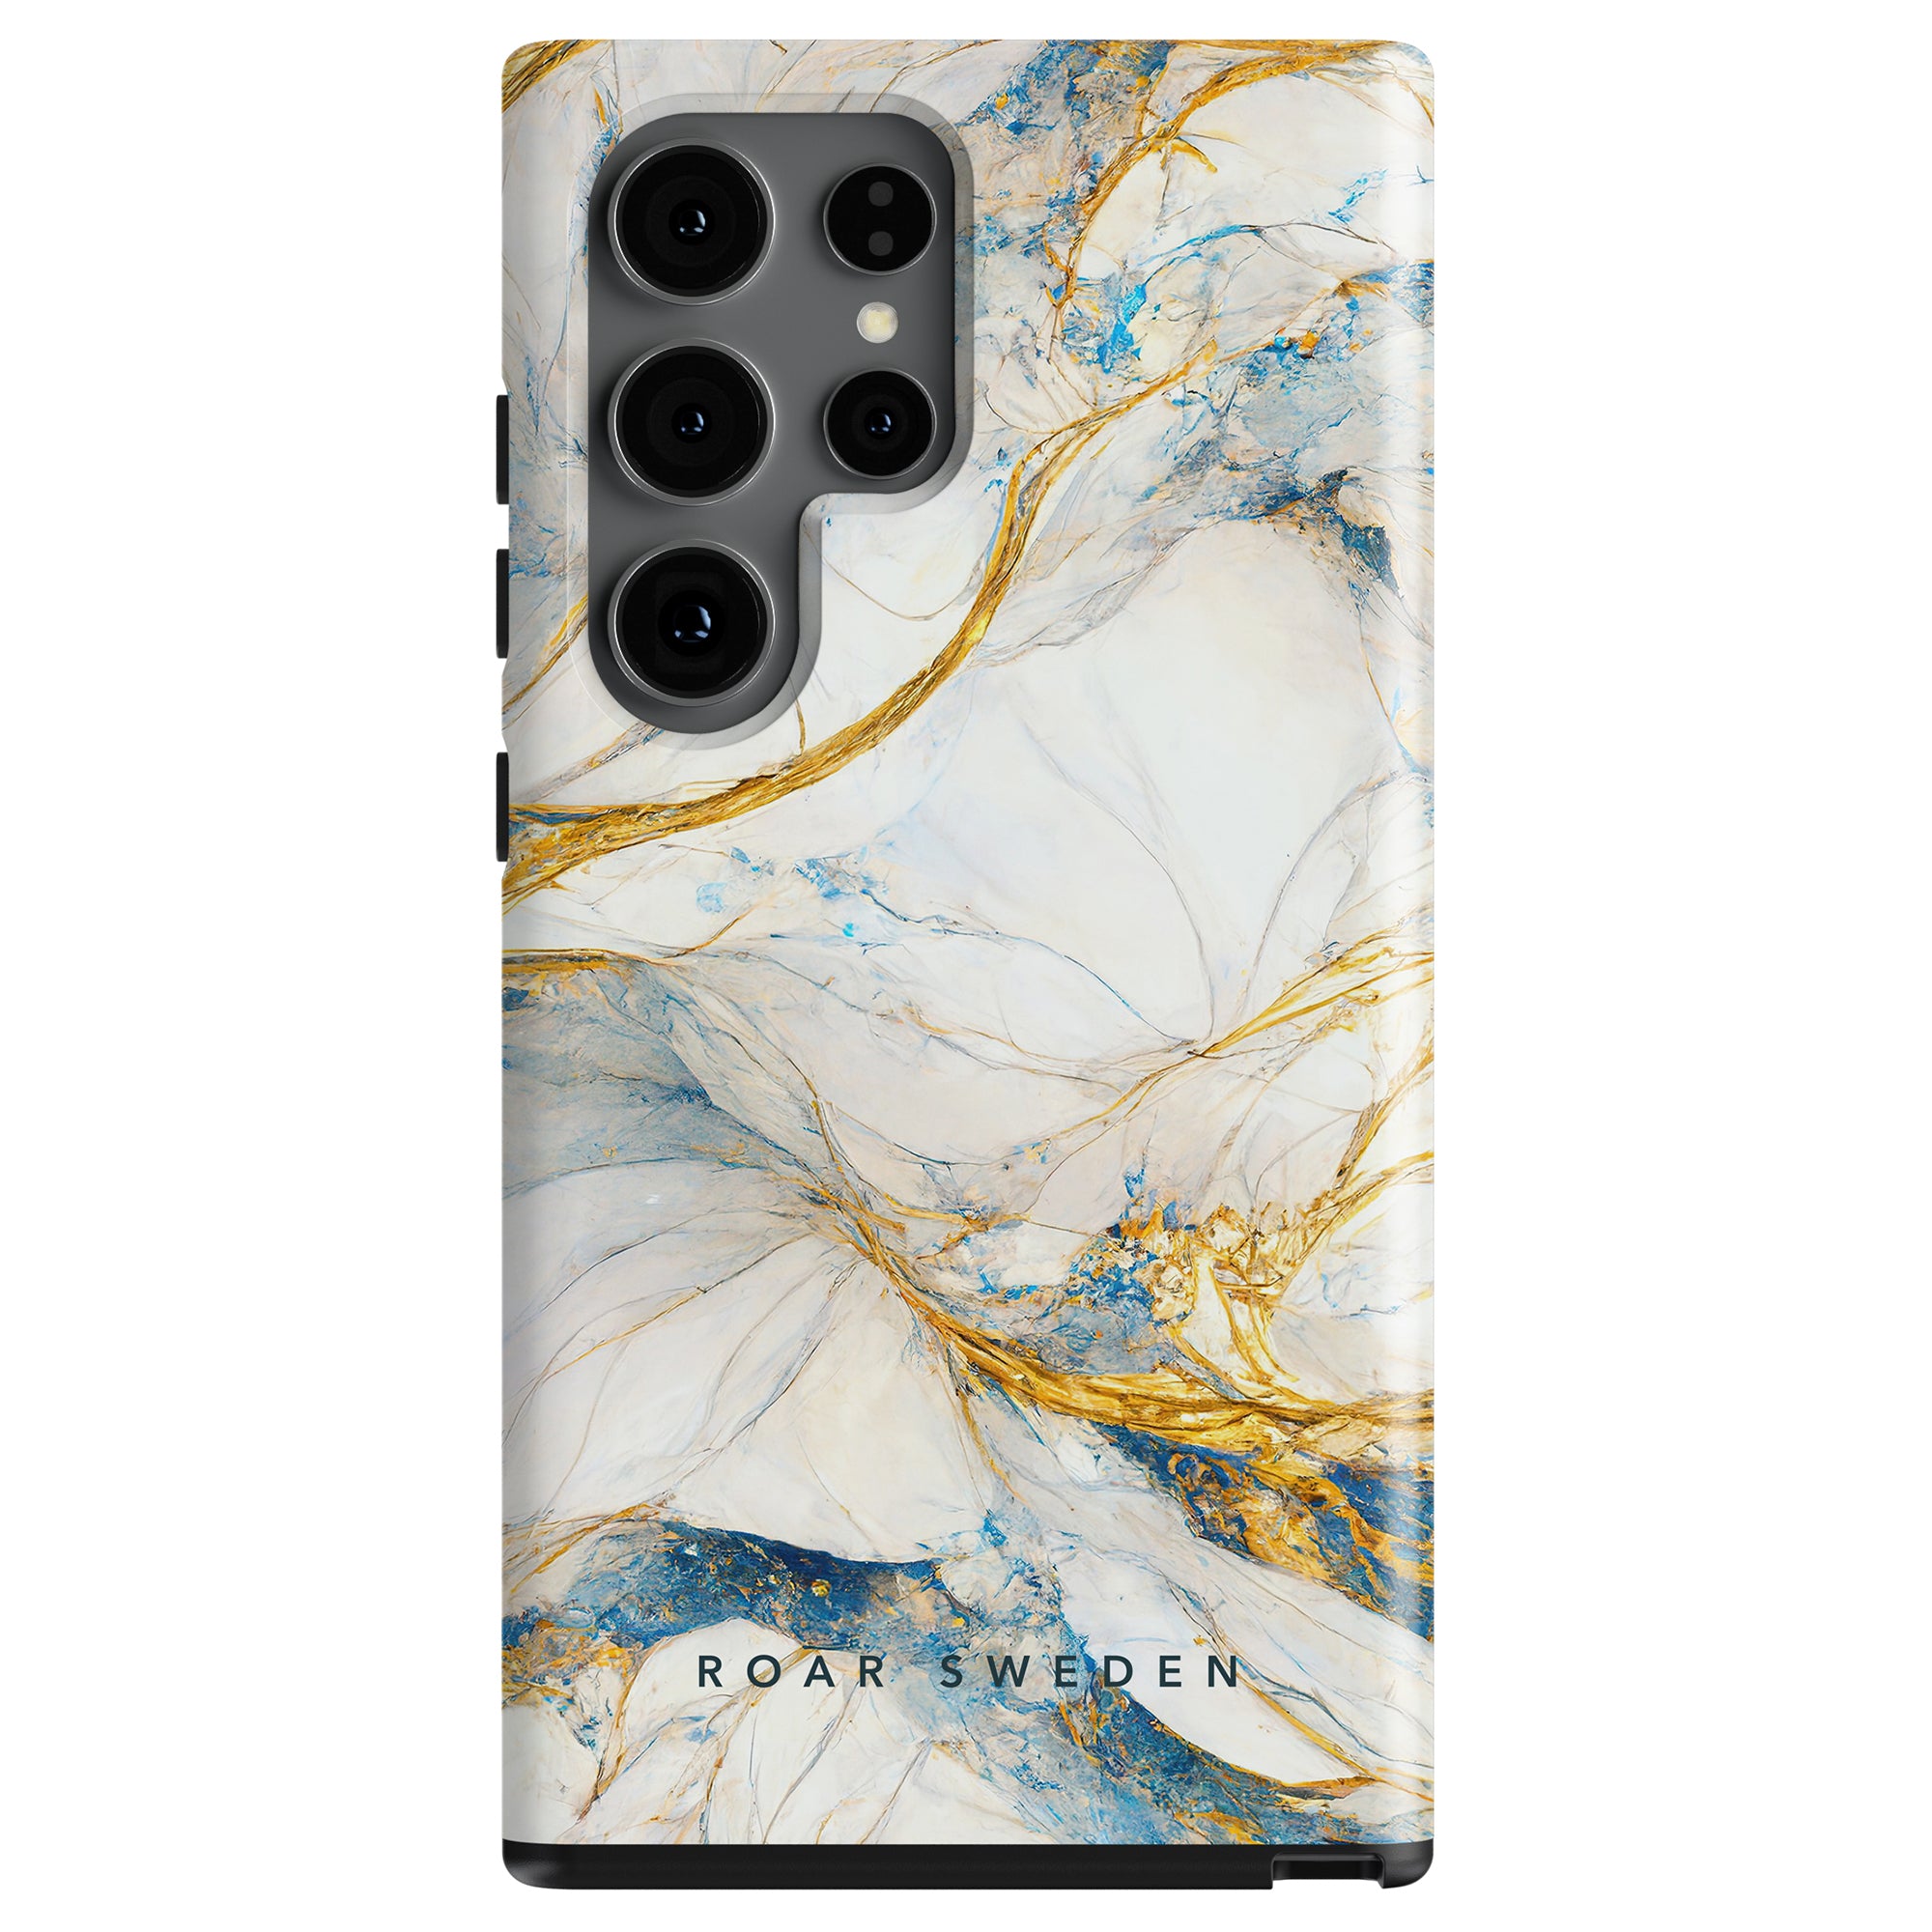 A Queen Marble - Tough Case with a marble design in white, blue, and gold from the hybrid collection, featuring a label "roar sweden" and multiple camera cutouts.